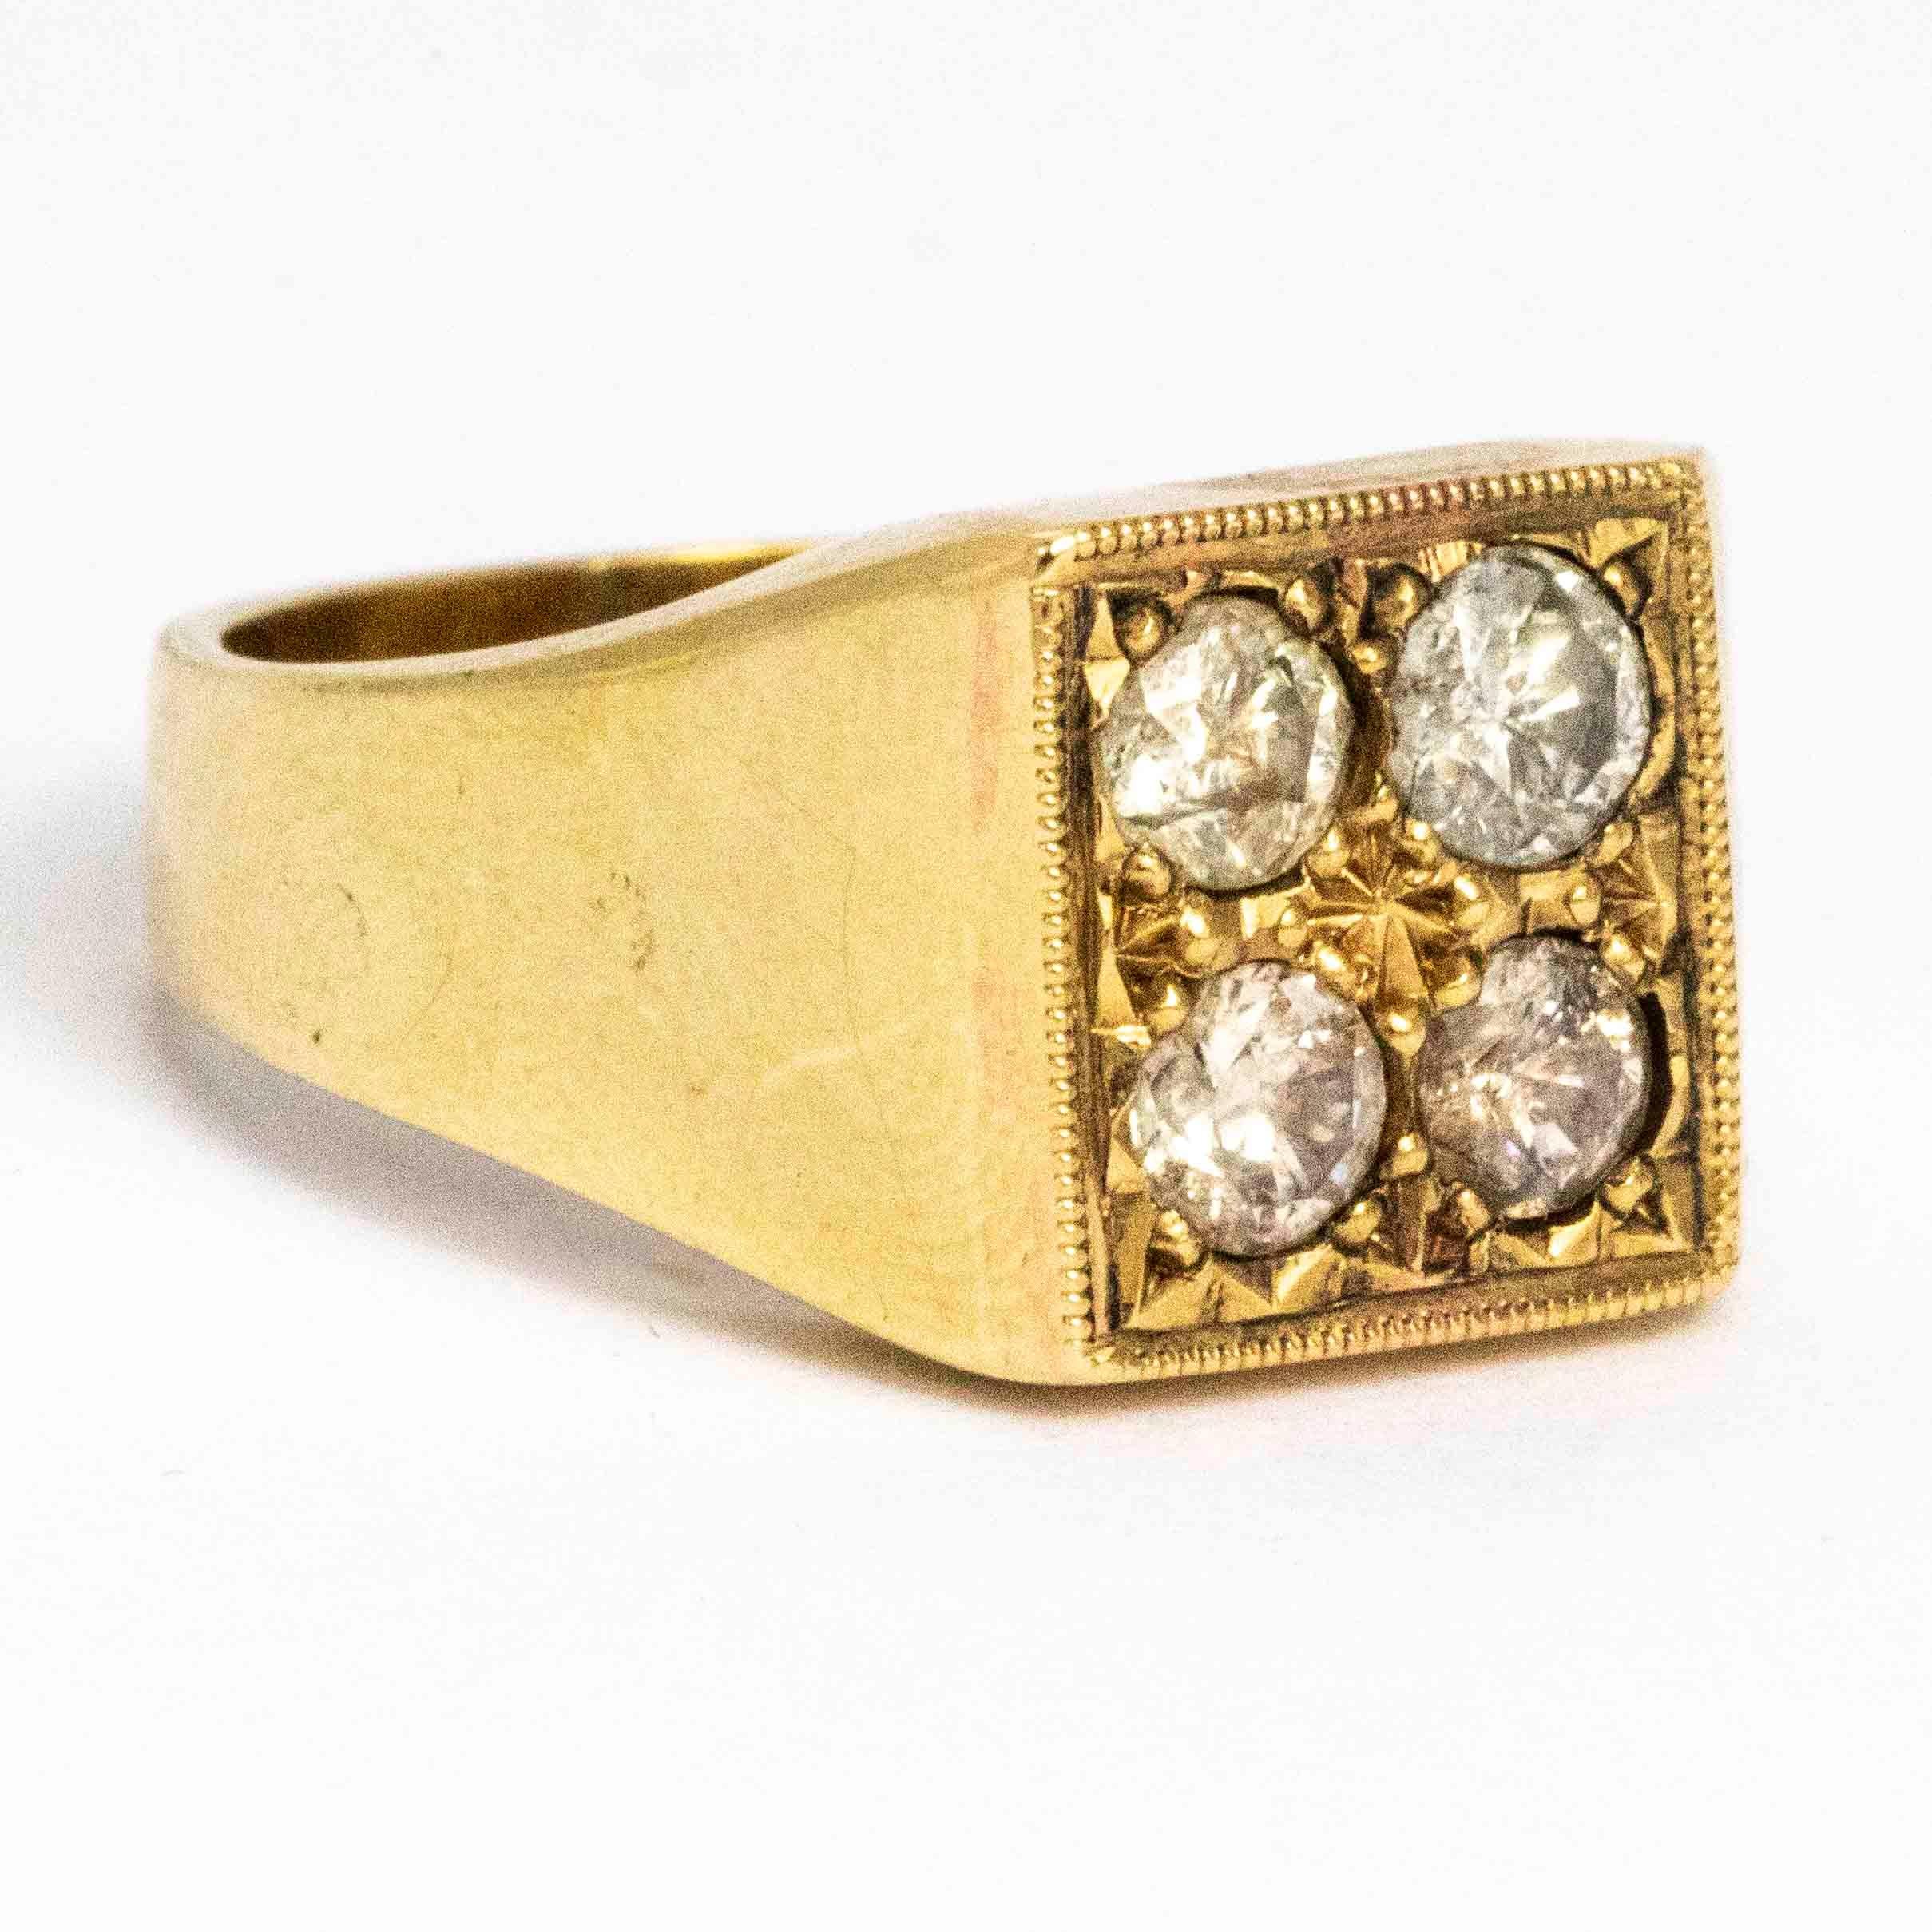 This unusual piece is modelled out of 9 carat gold and has four diamonds set on top. The diamonds are set in lovely ornate settings within a delicately beaded square at the top of the smooth band. Each diamond measures 25pts each. The dimensions of